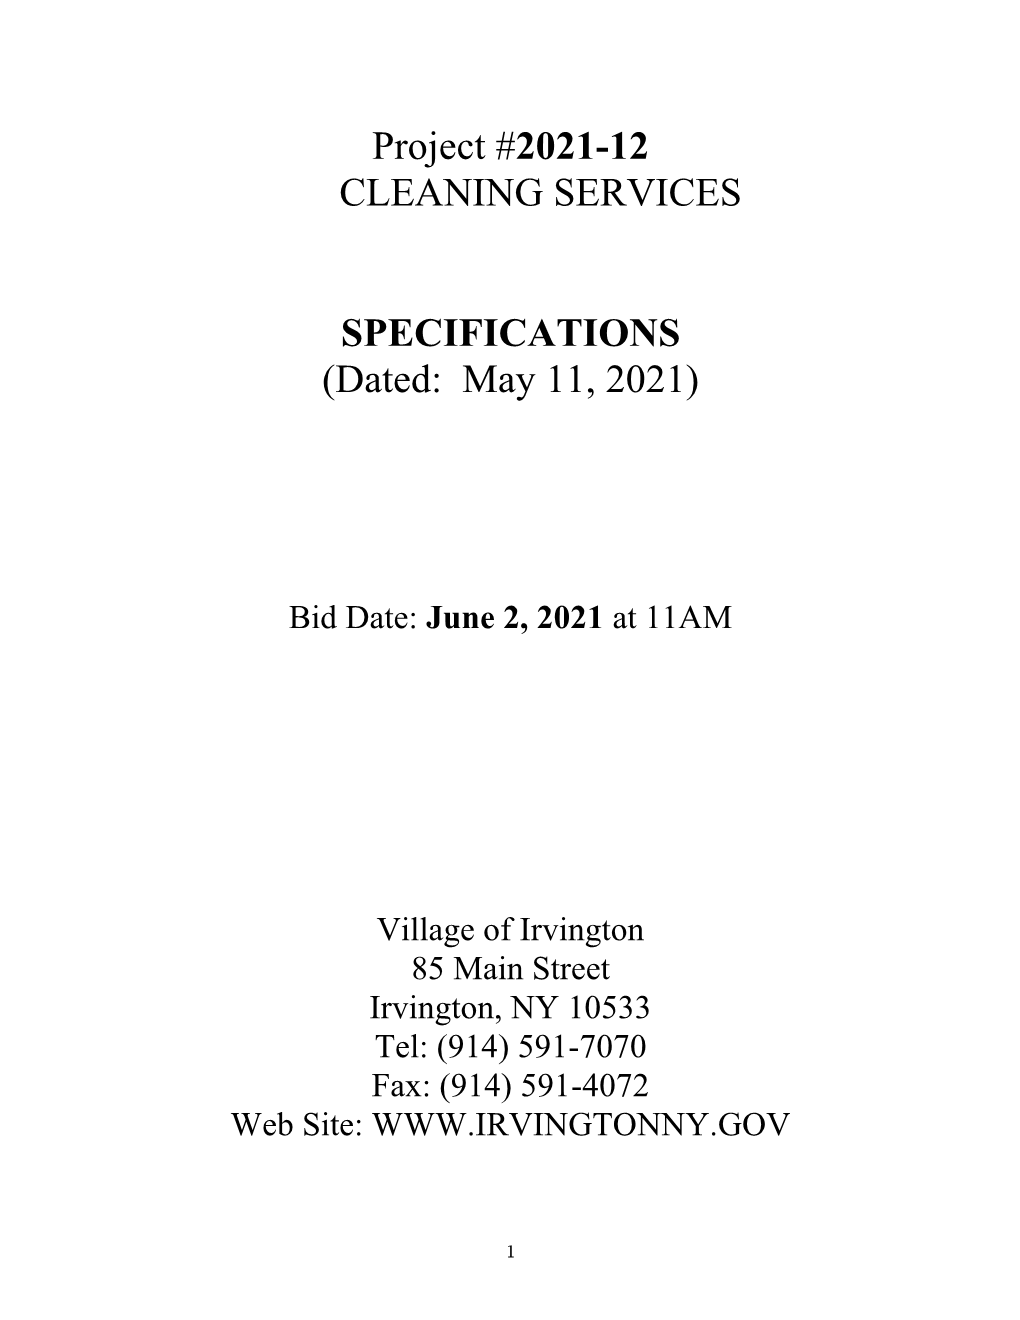 Project #2021-12 CLEANING SERVICES